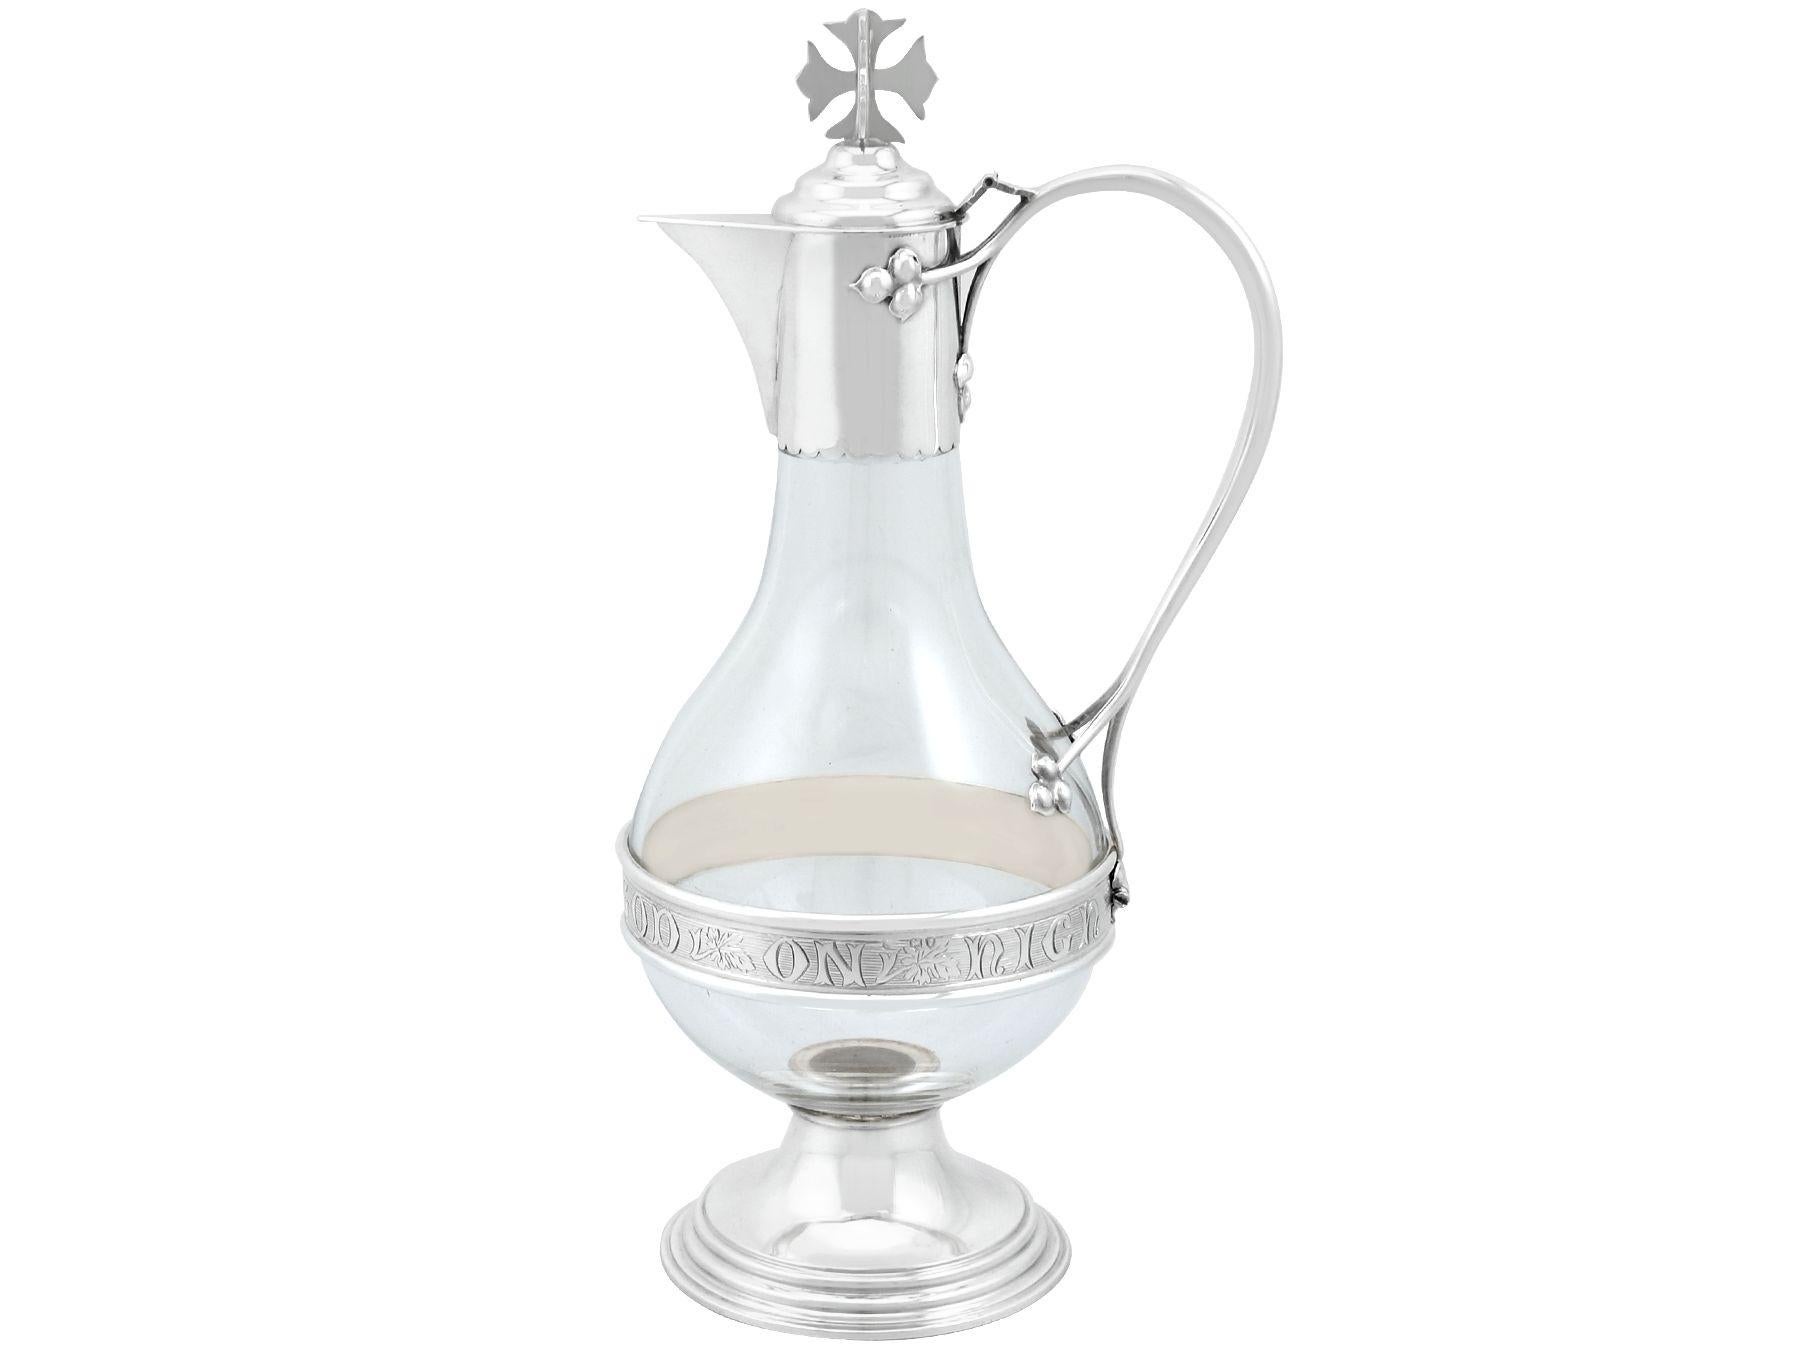 Antique Victorian Glass and Sterling Silver Mounted Communion Wine Jug In Excellent Condition For Sale In Jesmond, Newcastle Upon Tyne